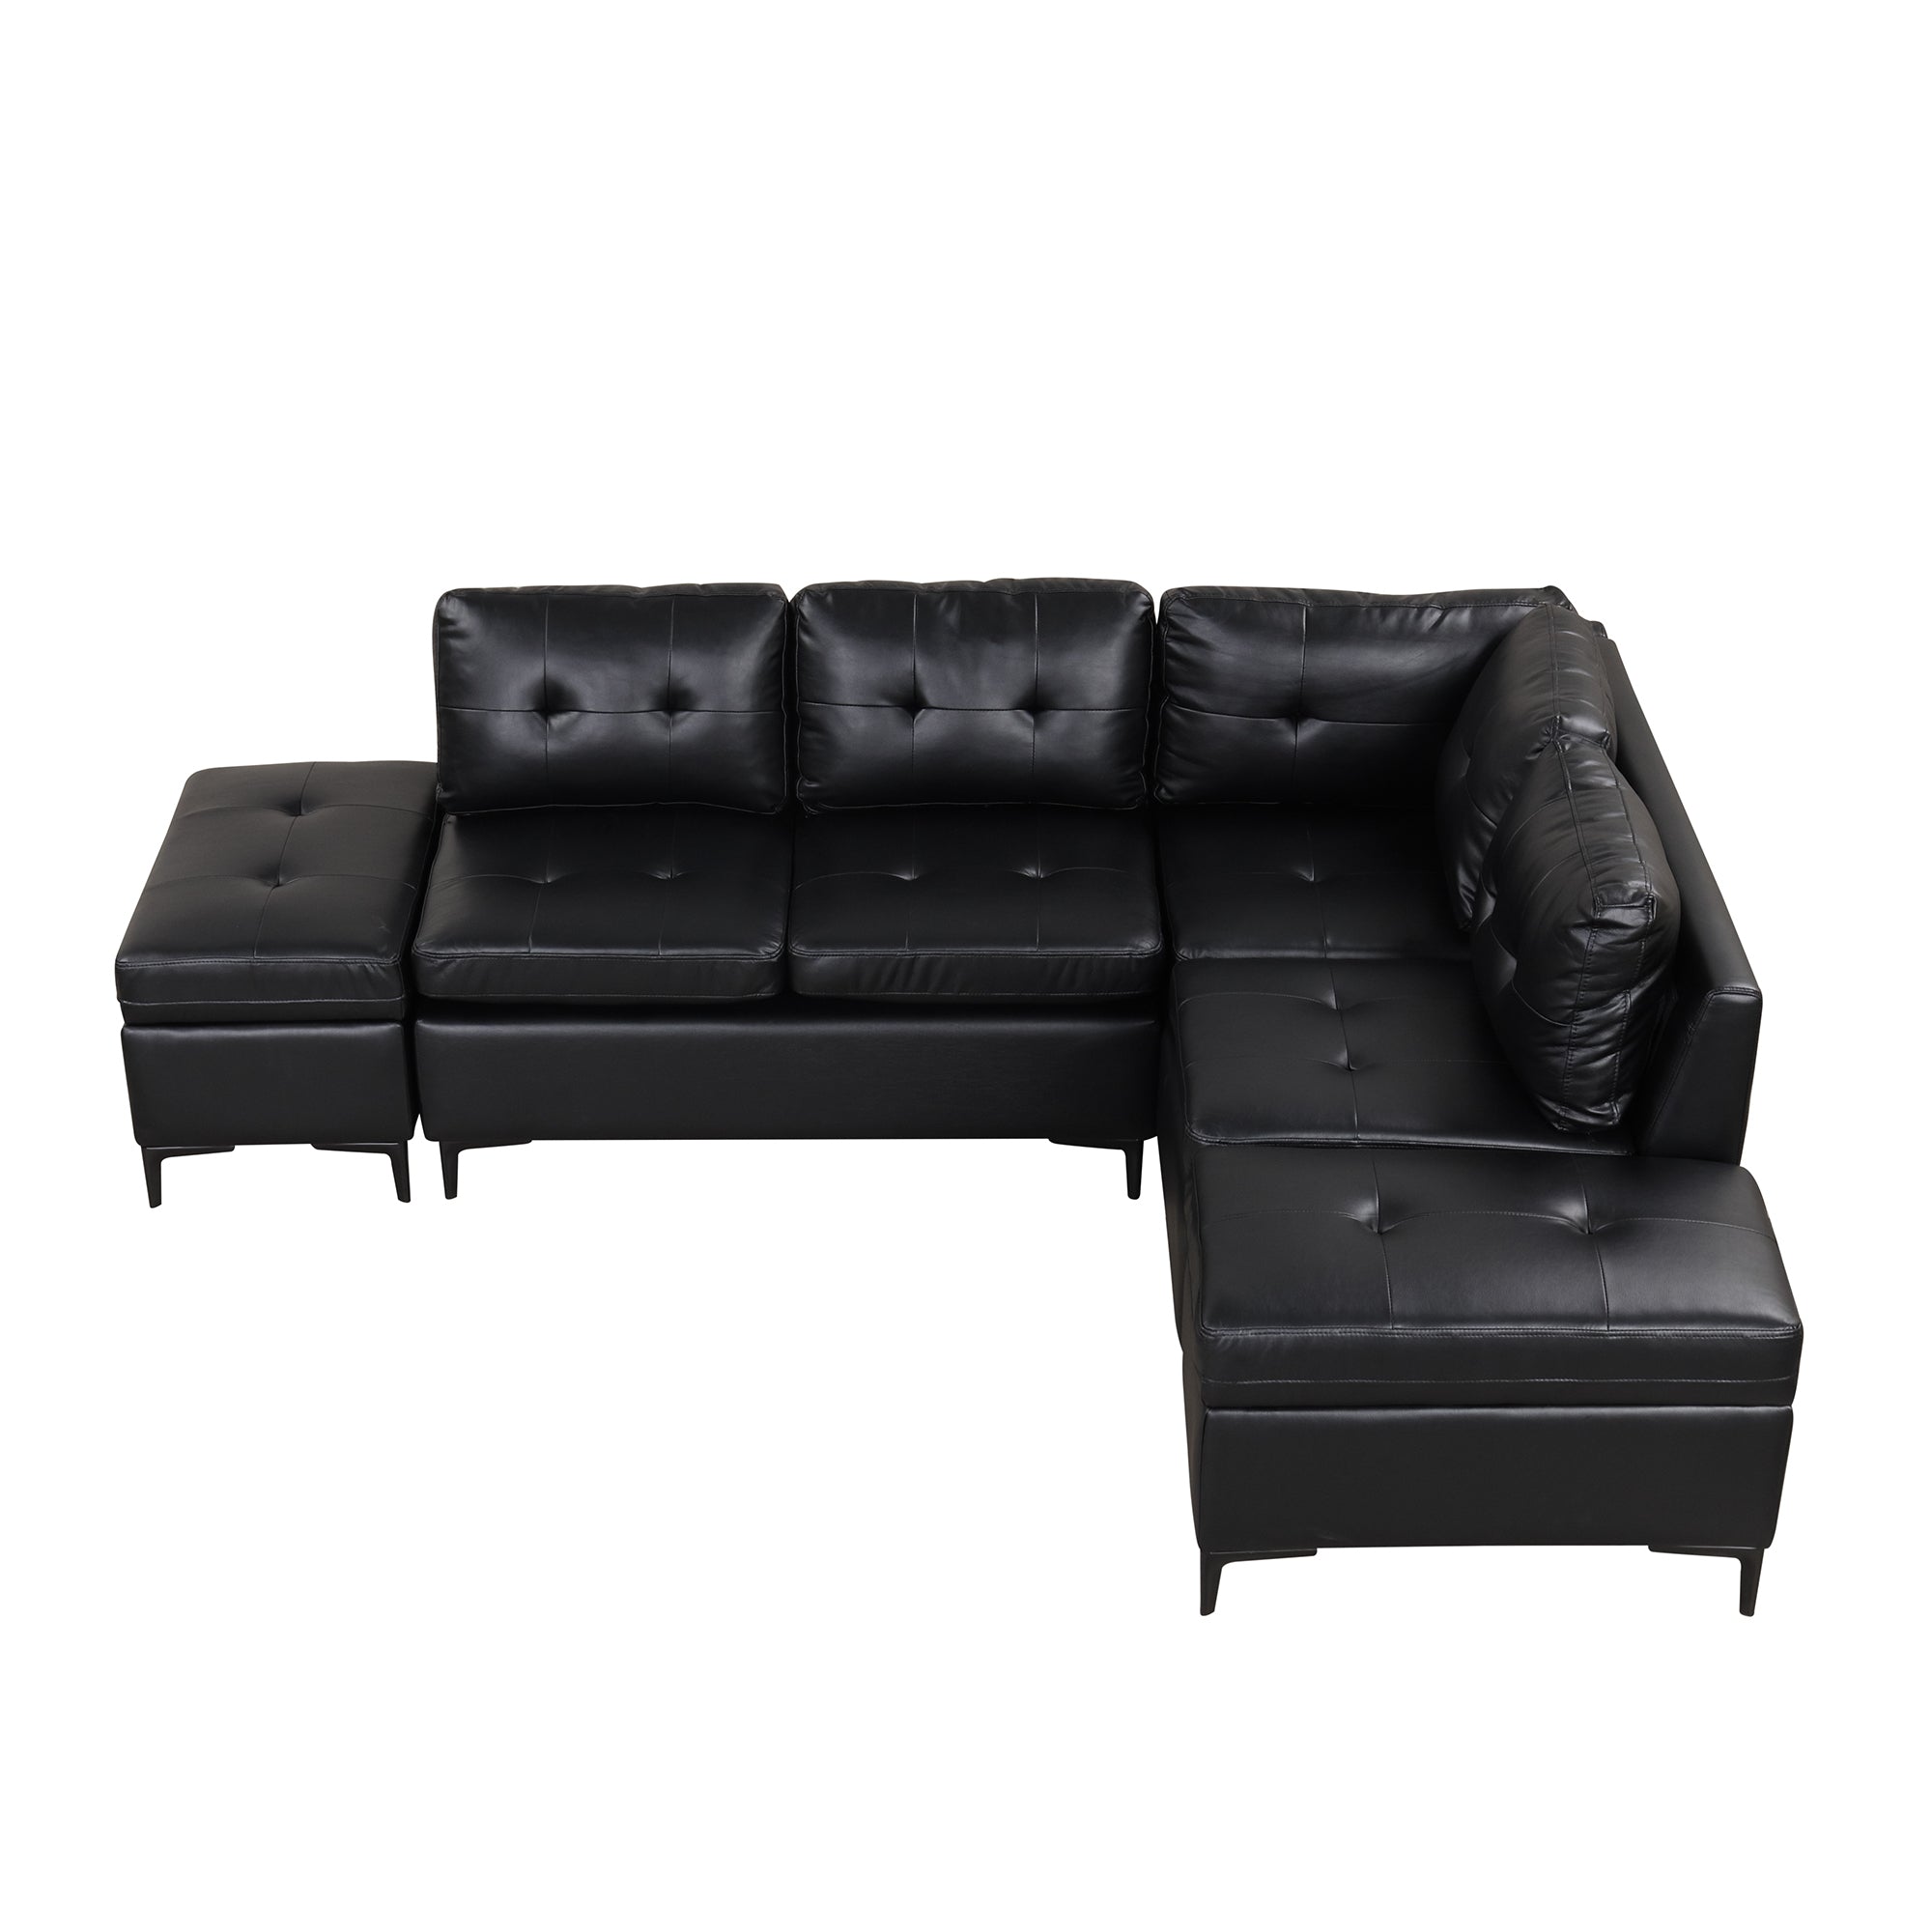 Black Faux Leather L-Shaped Sectional Sofa with Storage Ottomans-Stationary Sectionals-American Furniture Outlet